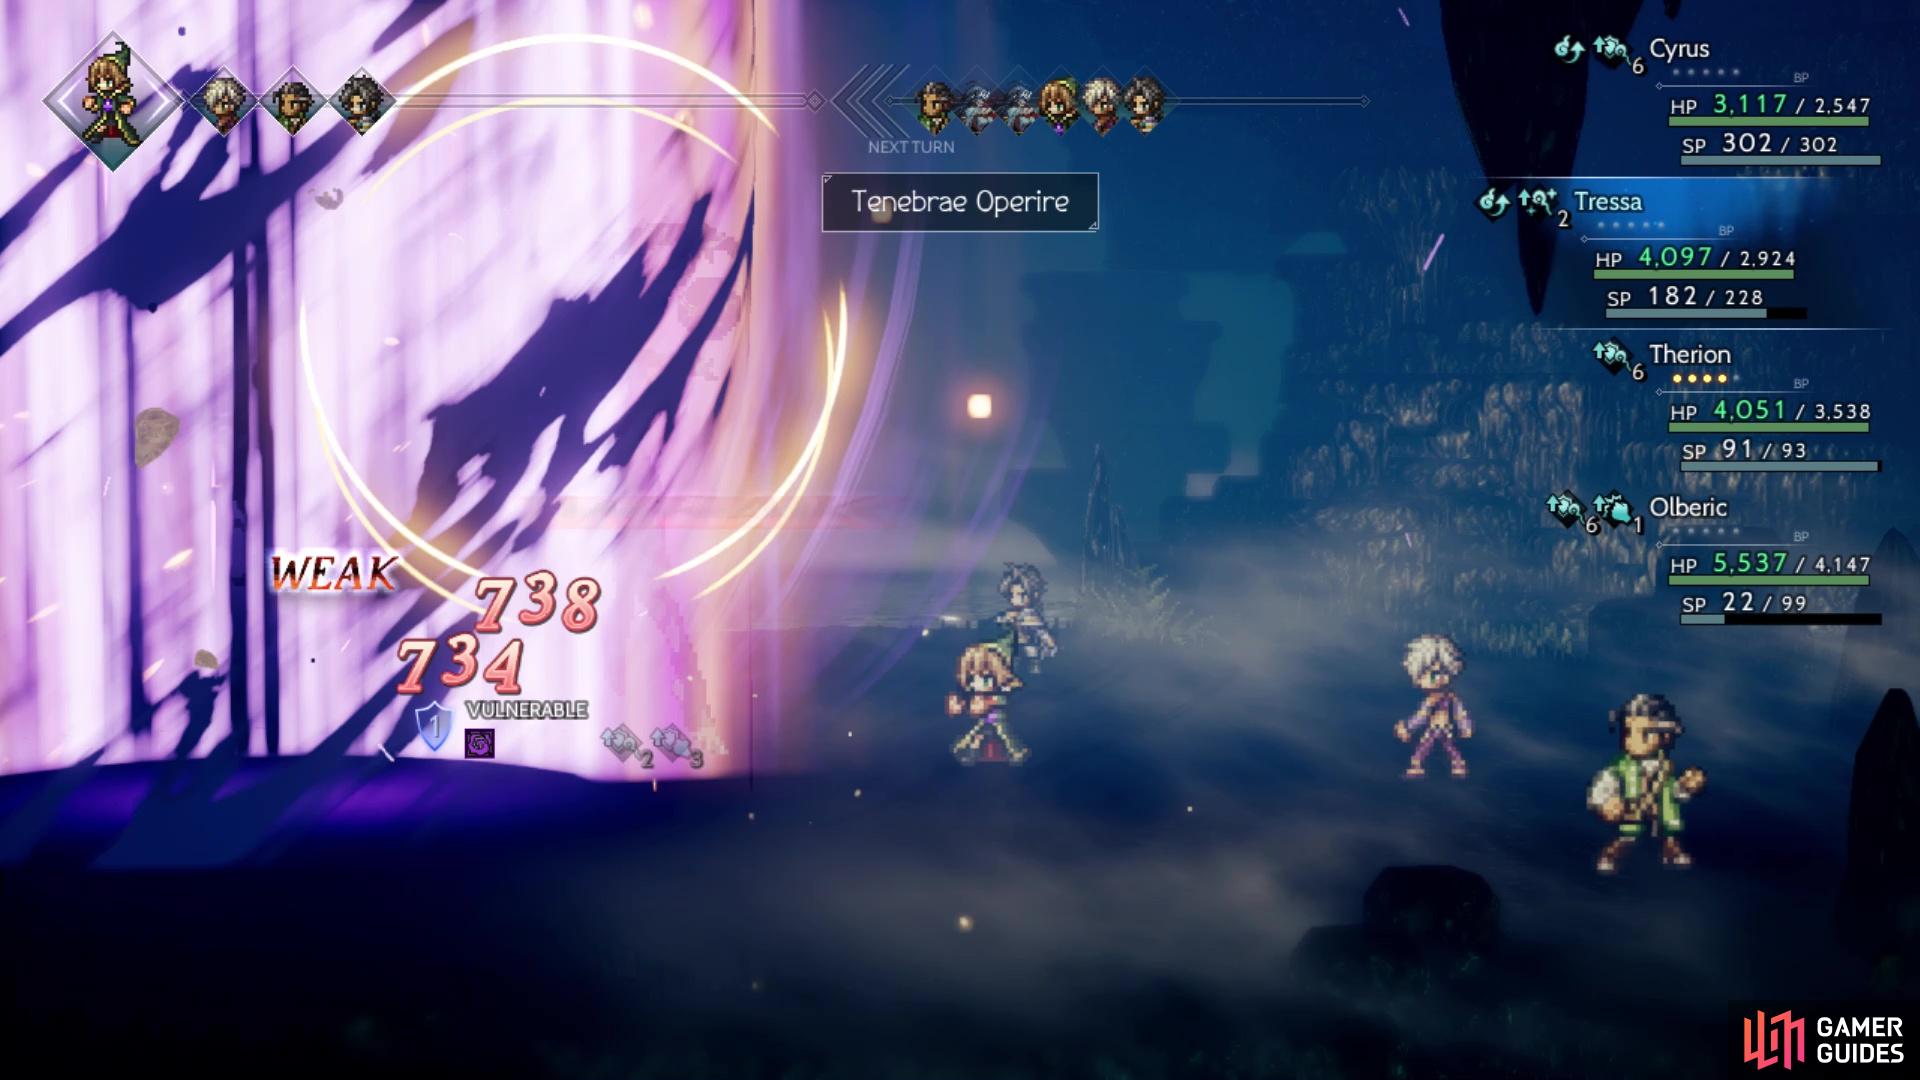 The Sorcerer's Tenebrae Operire will make the dark-only weakness phase a lot easier to break